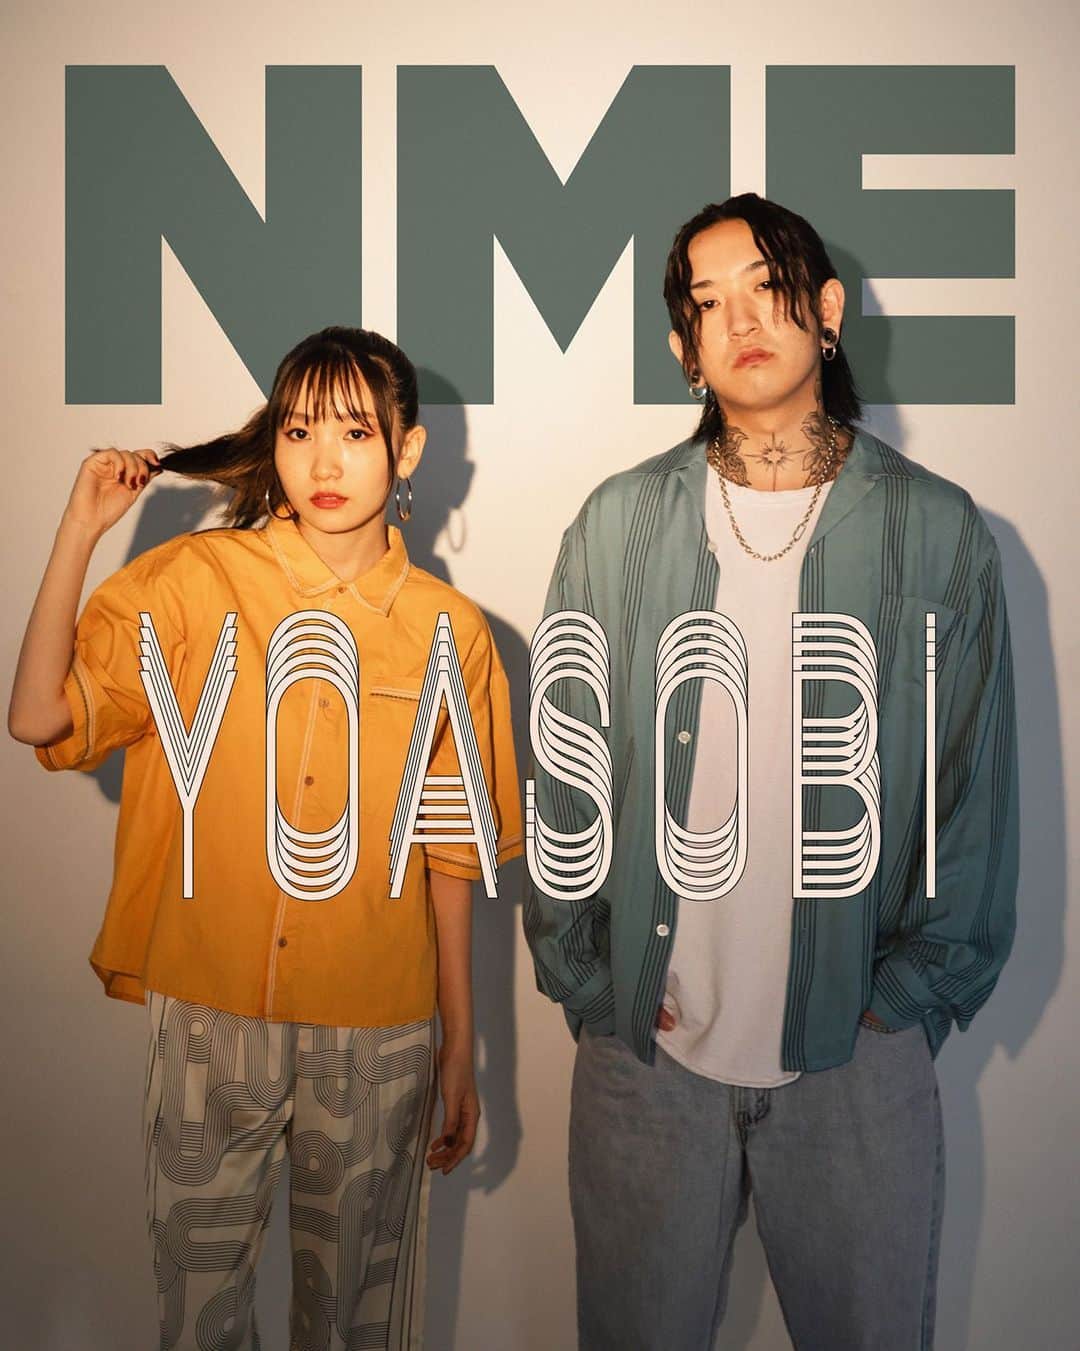 YOASOBIのインスタグラム：「With record-breaking hits including ‘Idol’ and ‘Into The Night’, iconic anime theme songs and an immersive literary outlook, YOASOBI have rocketed to the forefront of Japanese music – and the duo of Ikura and Ayase are more than ready to take on the world.  When asked to describe #YOASOBI’s magic in their own words, Ayase points to flexibility and joyous genre-agnosticism, definitive qualities of J-pop. “As YOASOBI, we are a unit that expresses that spirit – in that sense, aren’t we the J-pop band?”  @yoasobi_staff_ are on The Cover this week. Read the full story with @lilasikuta and @ayase_0404 at link in bio  Words: JX Soo / @jadeexcess Photographer: John Choi / @johnnchoi Hair & Makeup: YOUCA / @youca1220 Styling: Shota Funahashi / @shota2784 Label/Mgmt: Sony Music Entertainment Japan / @sonymusic_jp  #NMETheCover」